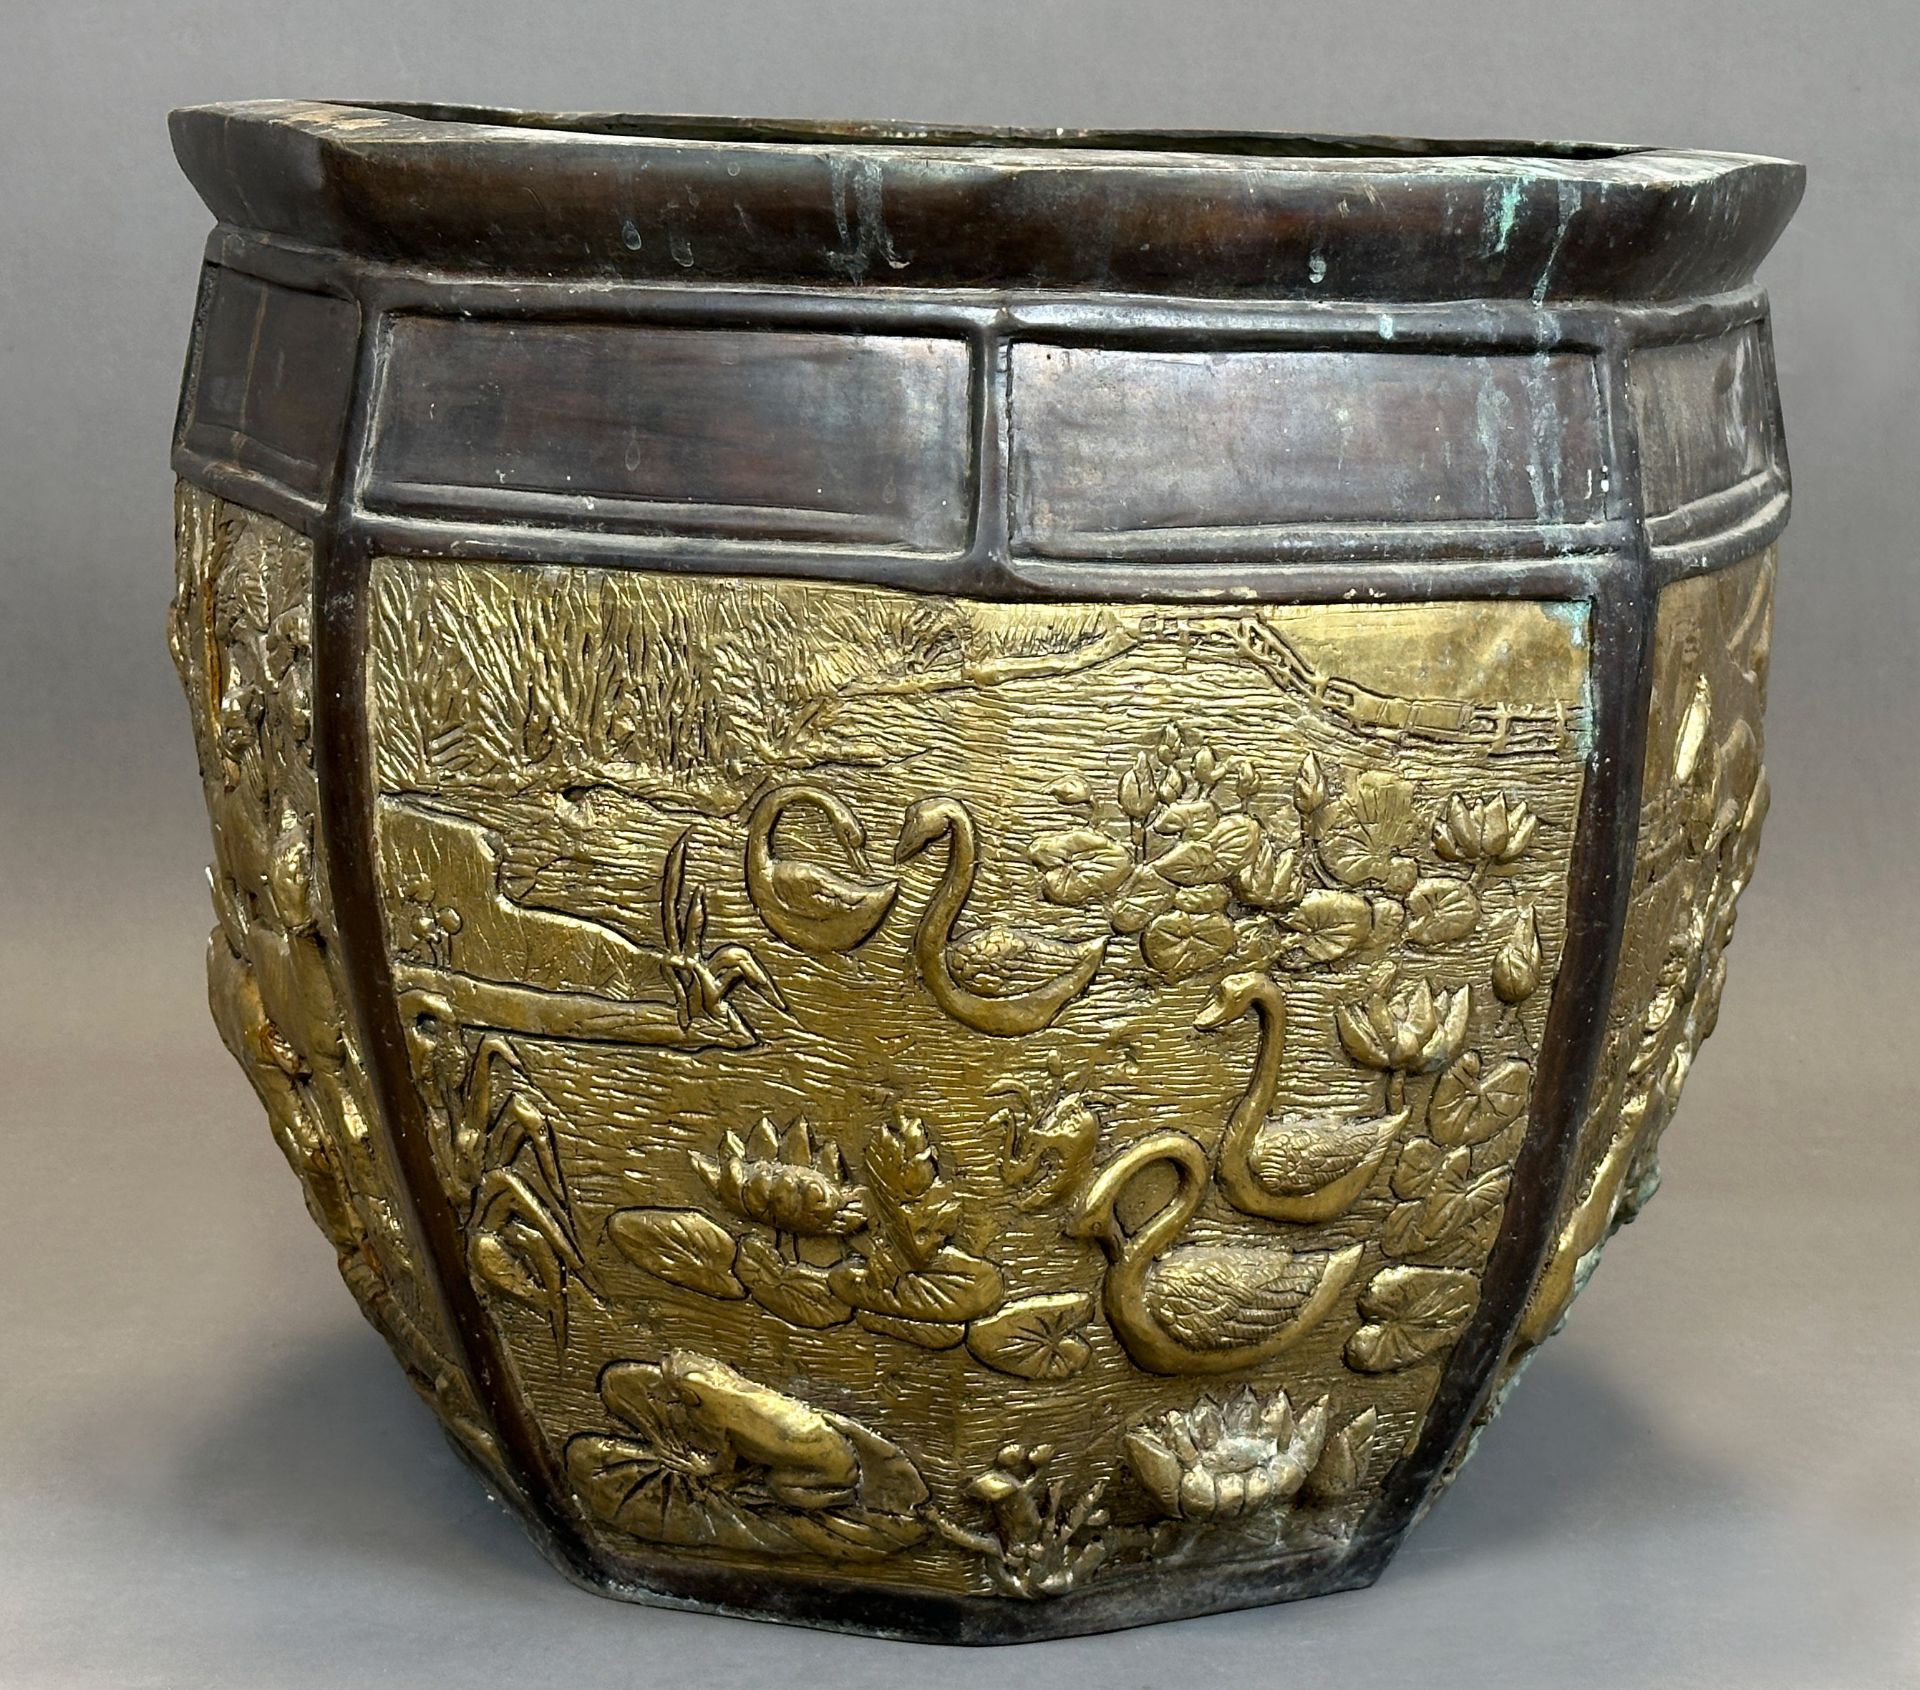 Bronze cachepot. Cachepot. China. Early 20th century. - Image 5 of 8